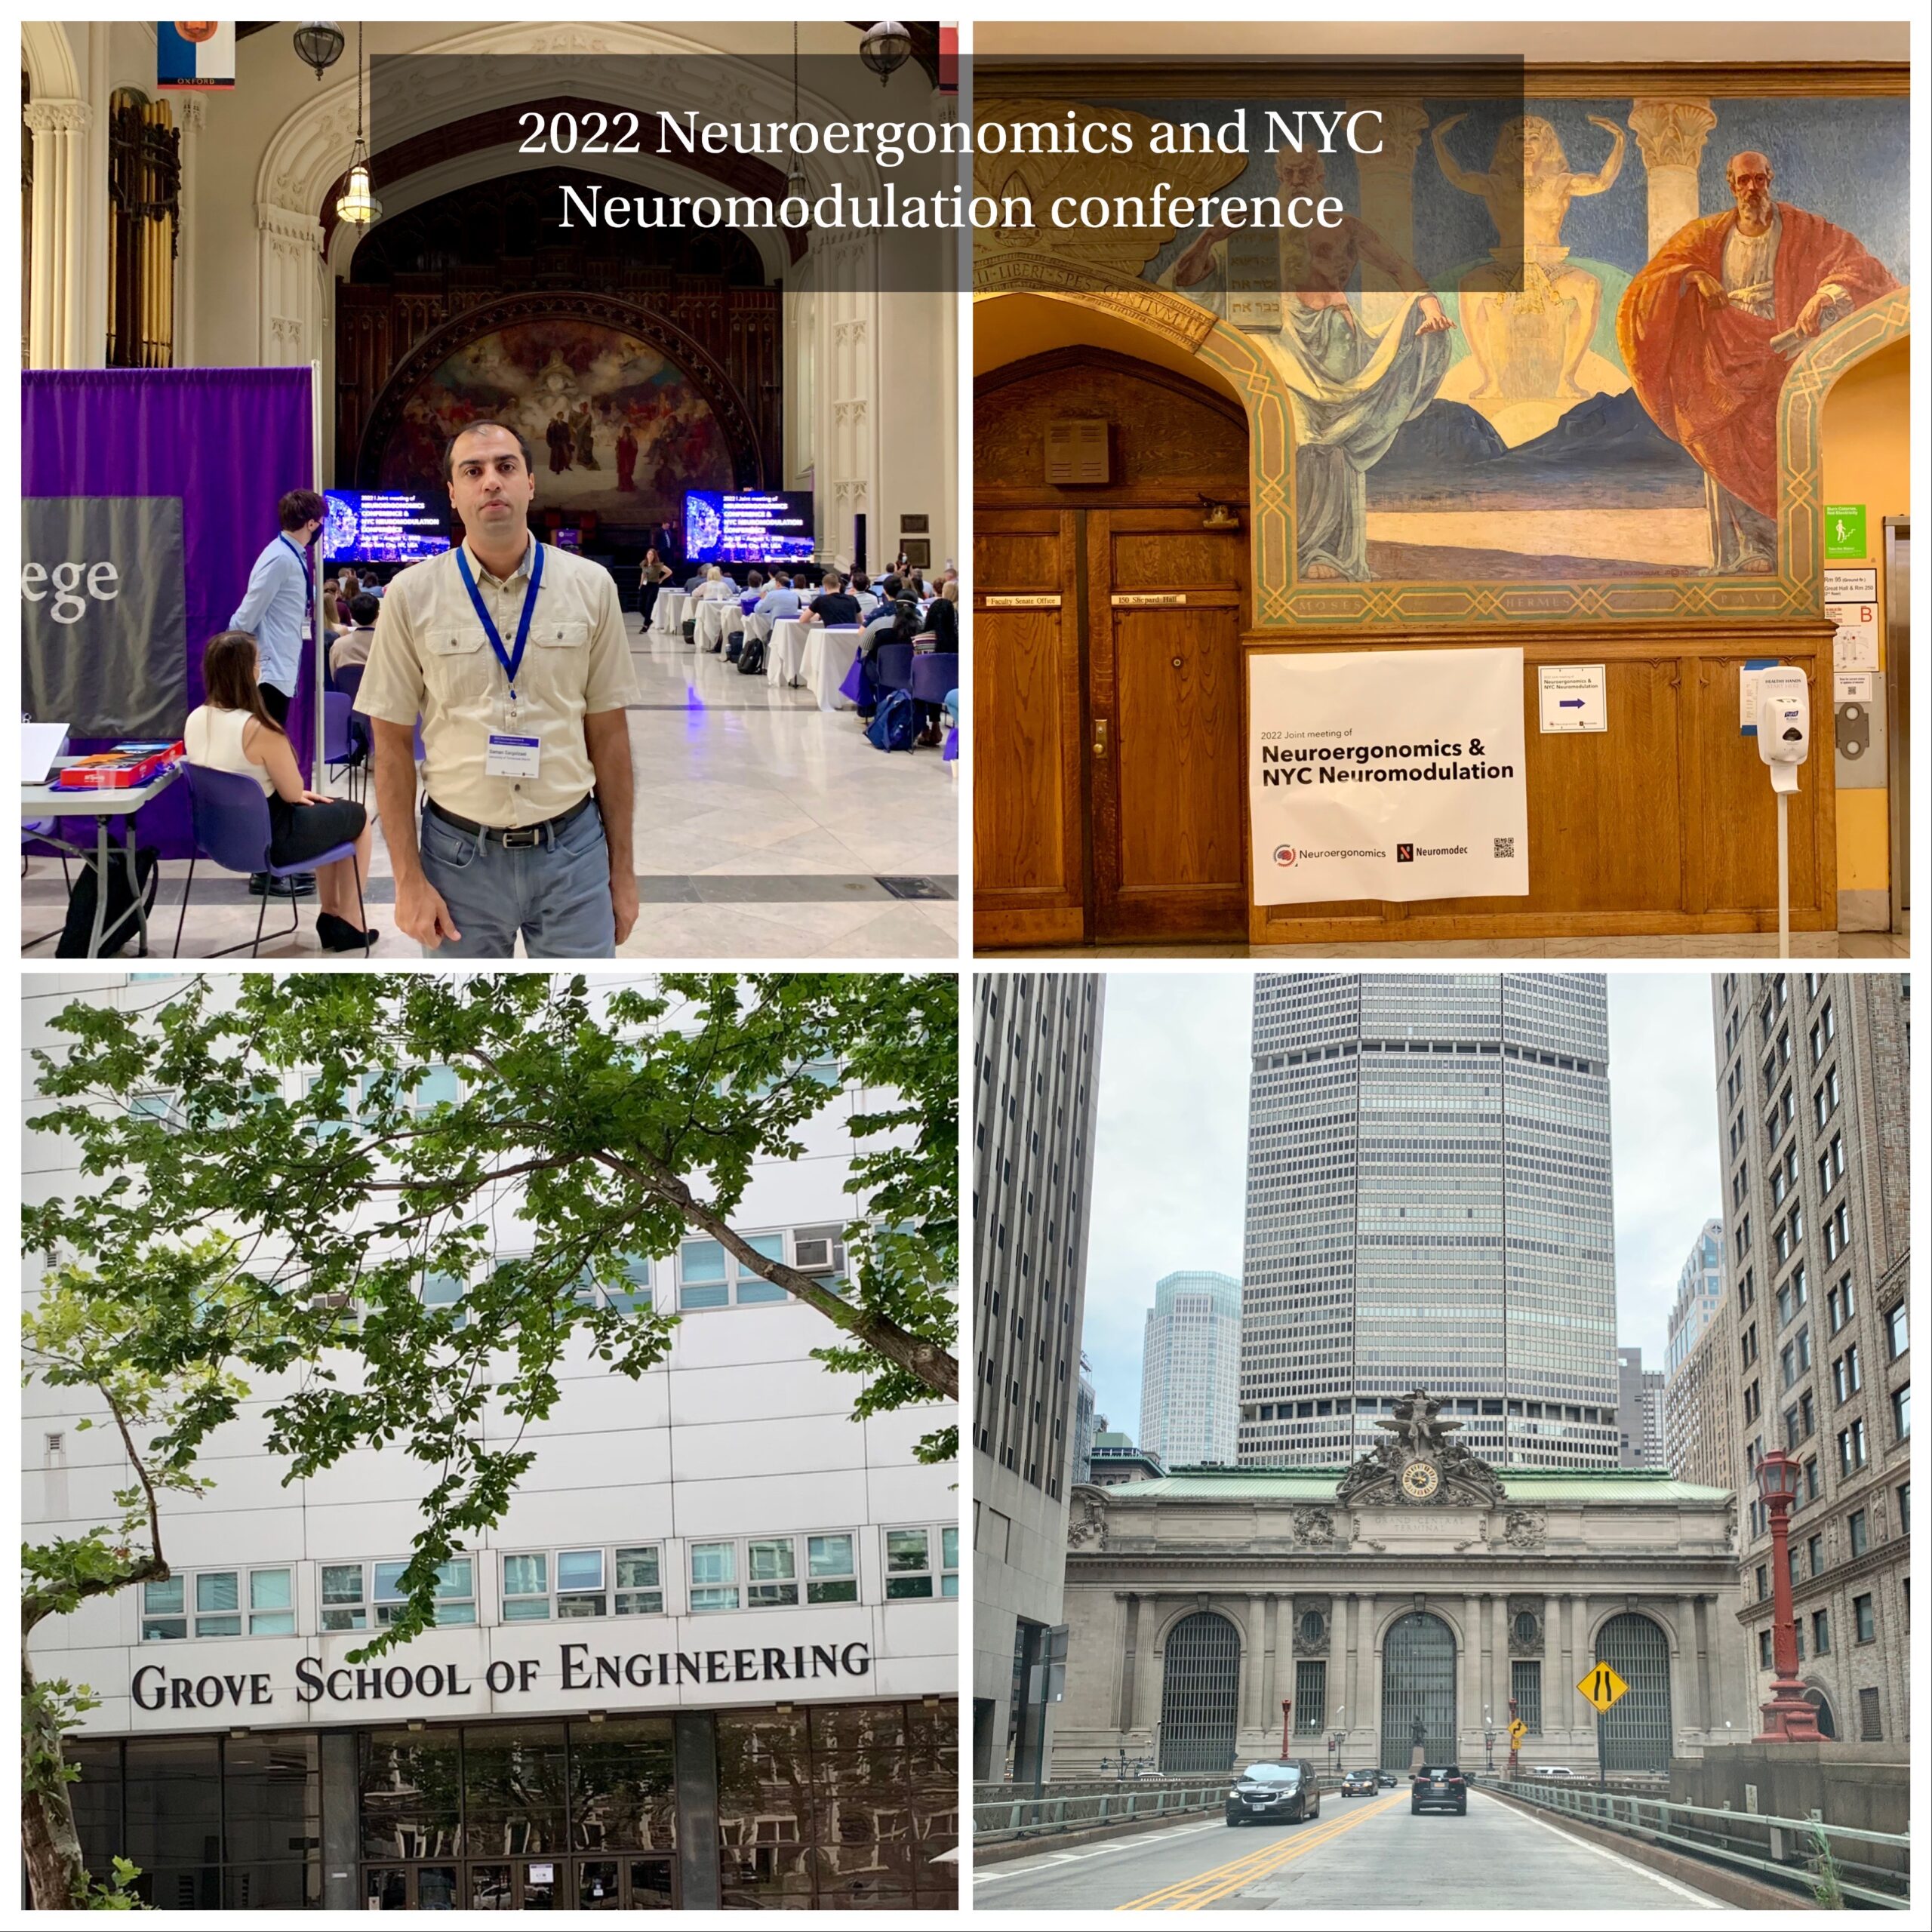 BAR Lab recently joined 2022 Neuroergonomics and NYC Neuromodulation Conference!